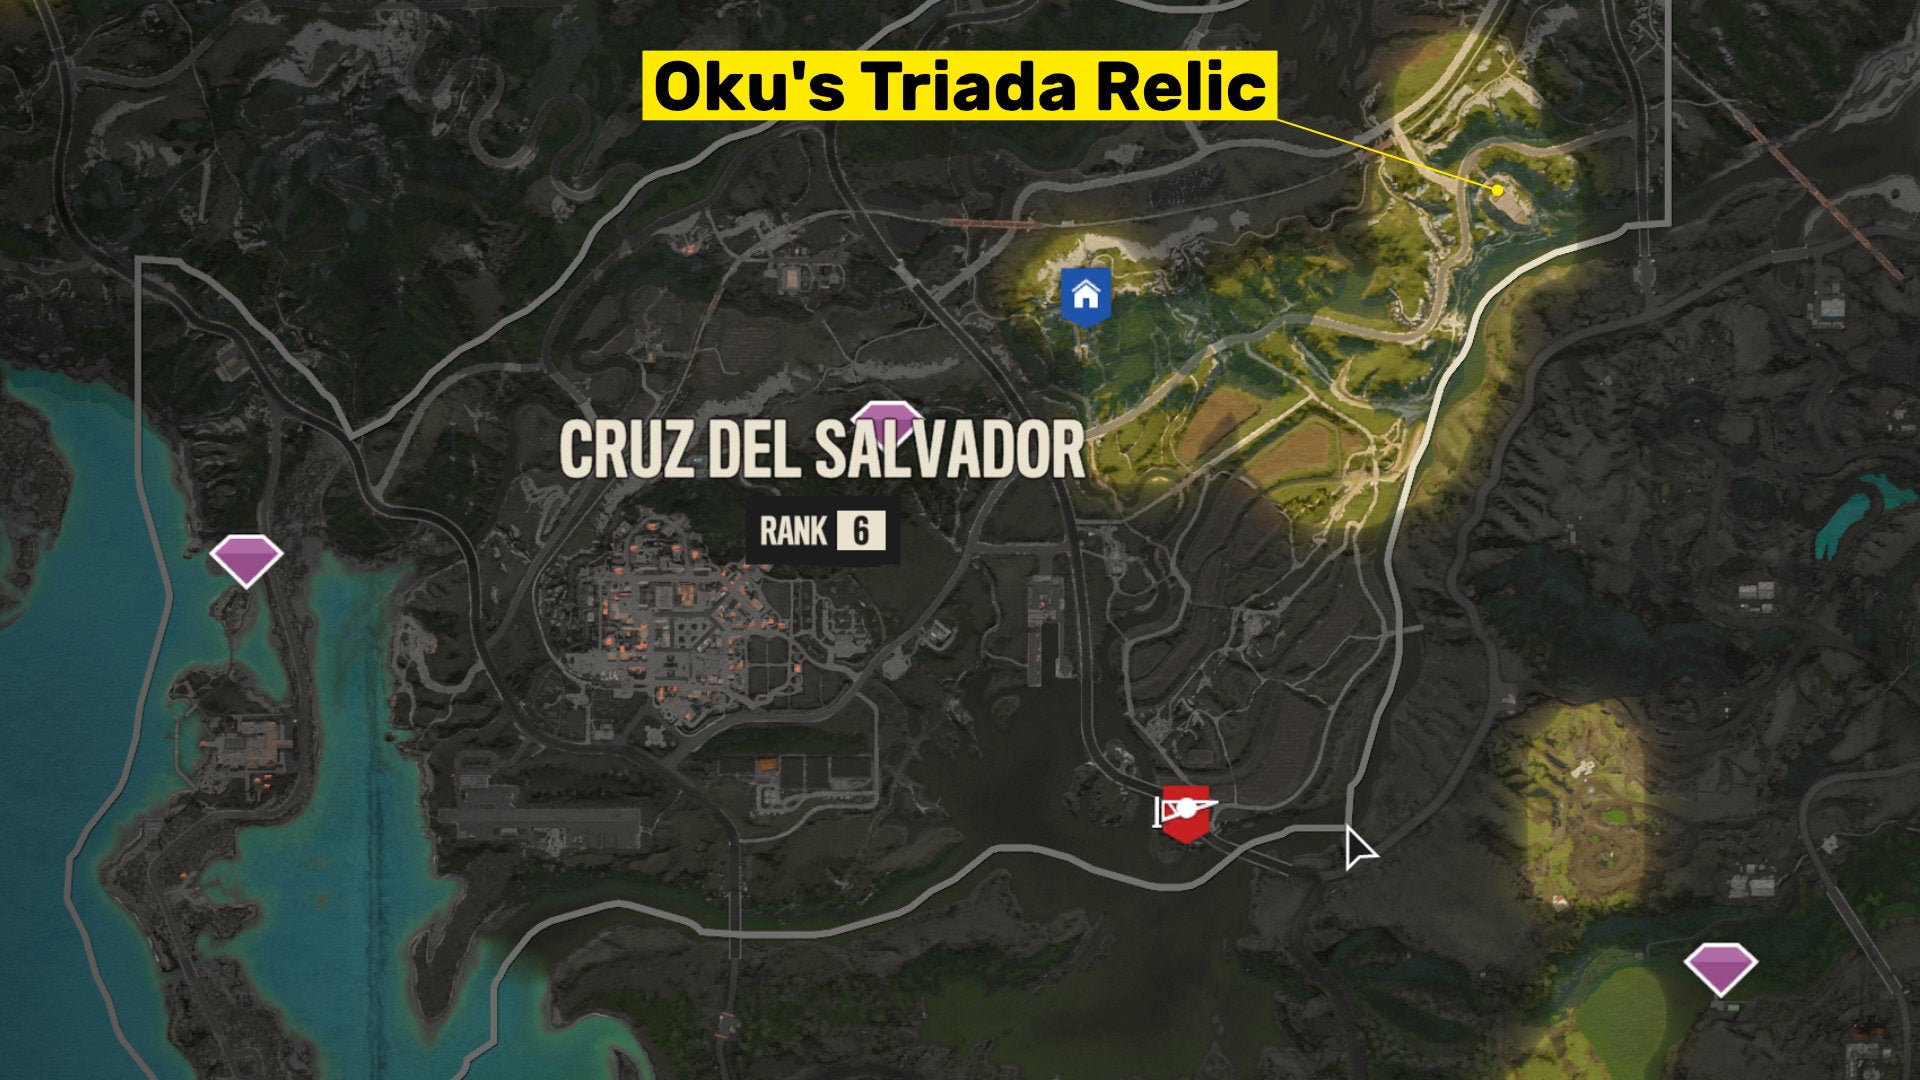 A screenshot of the Far Cry 6 map with the location of Oku's Triada Relic highlighted.